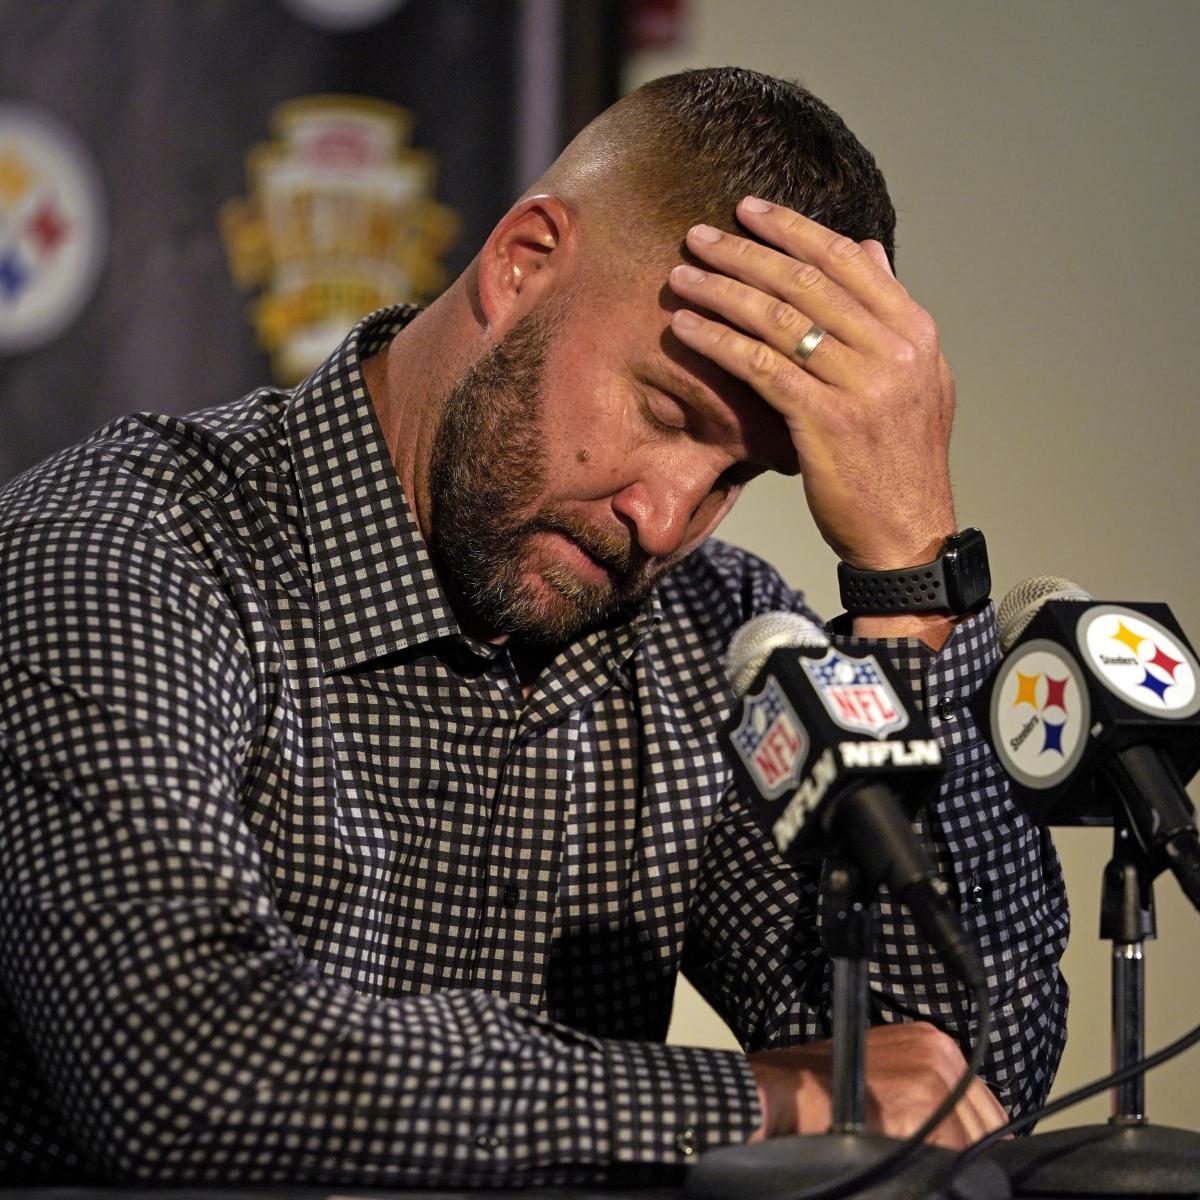 Is It Time for the Steelers to Bench Ben Roethlisberger?